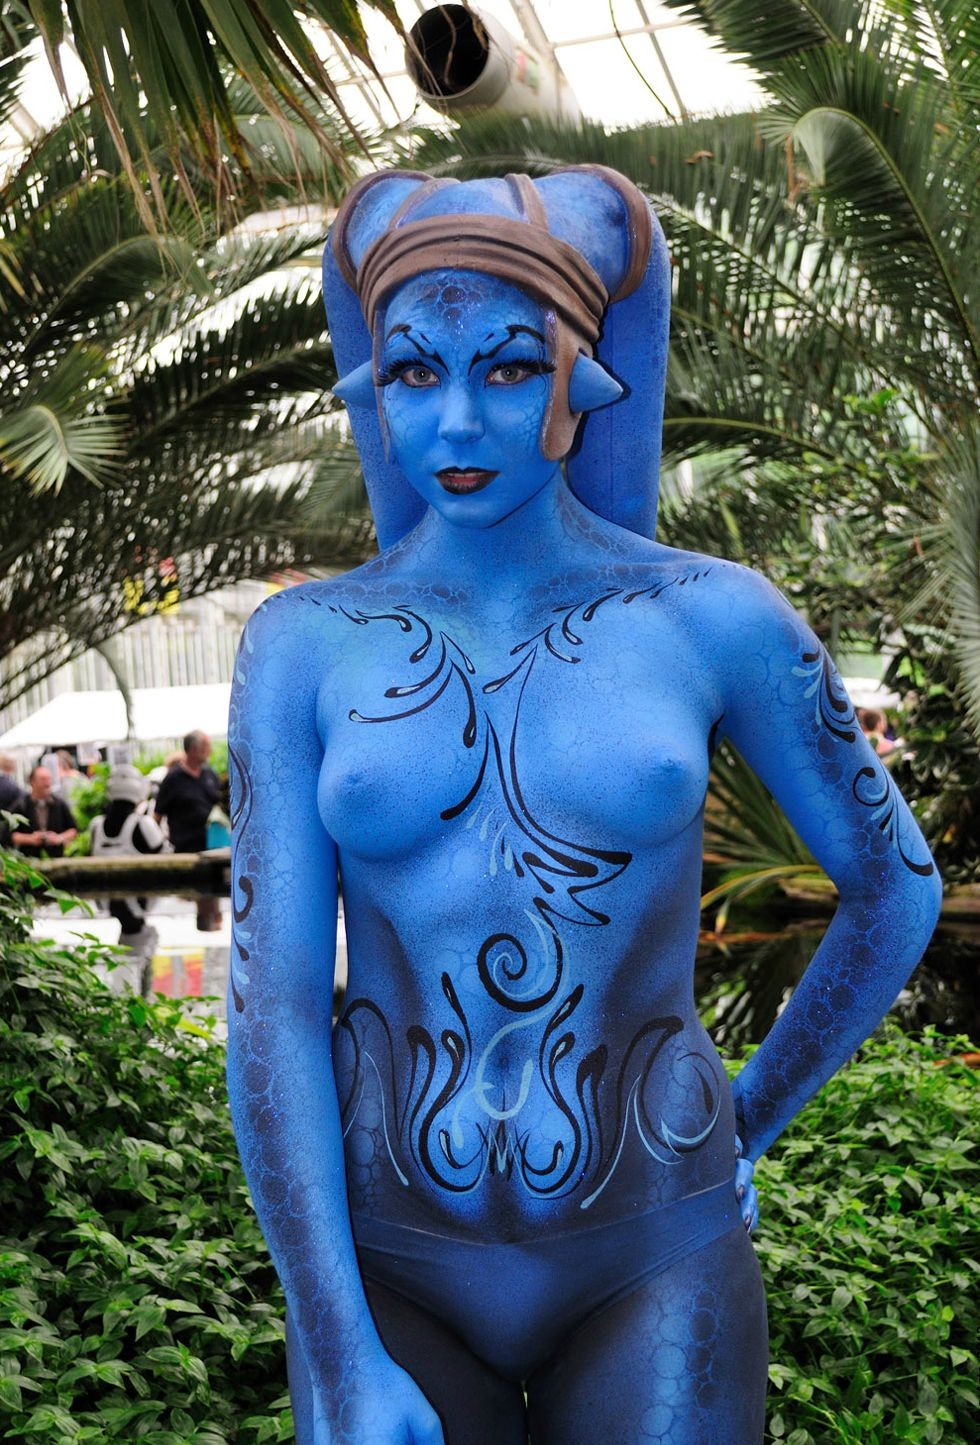 Body Paint Cosplay Porn.